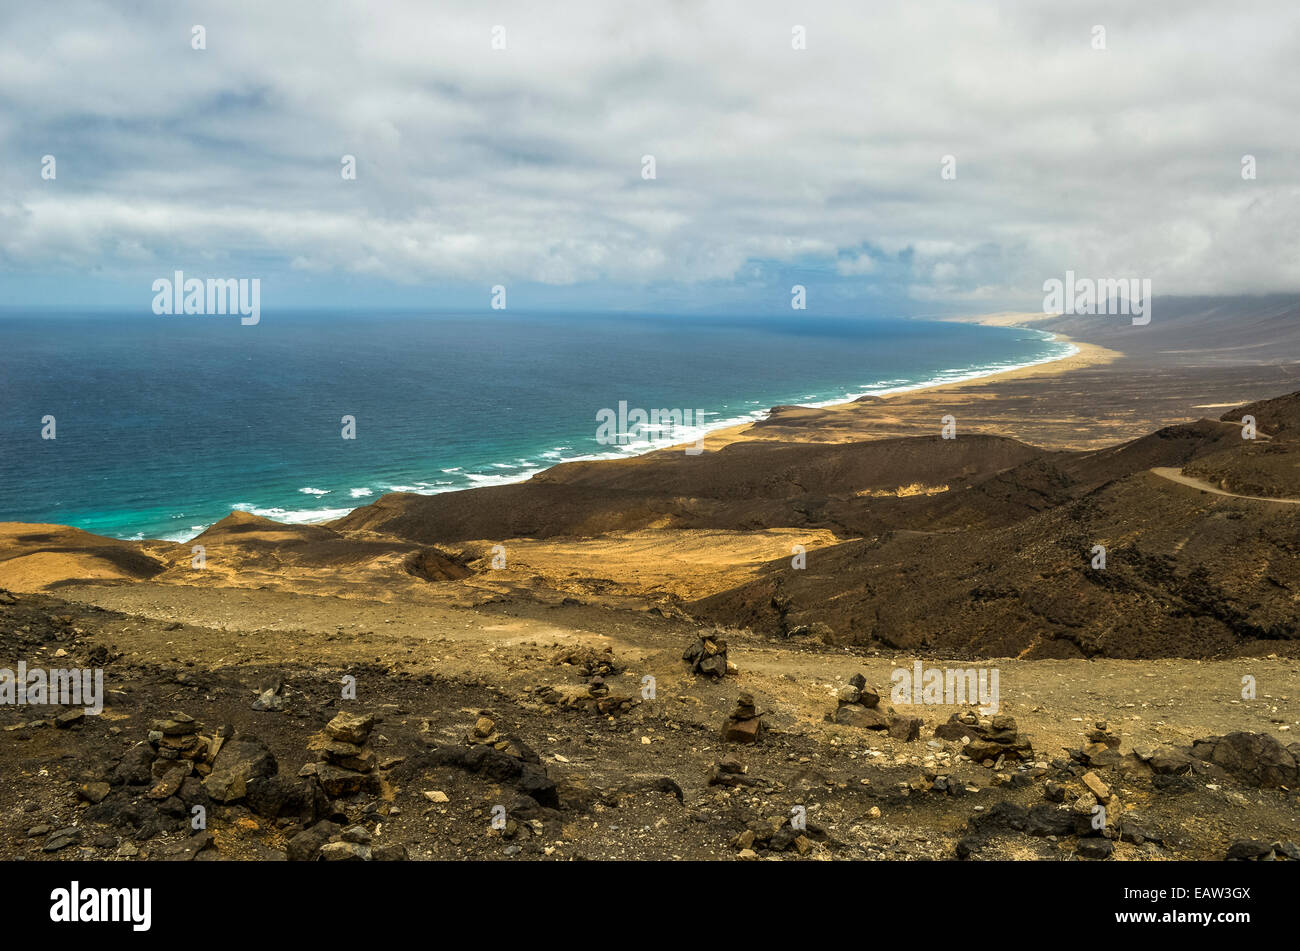 Aerial View of Cofete Beach in Fuerteventura, Canary Islands, Spain Stock Photo